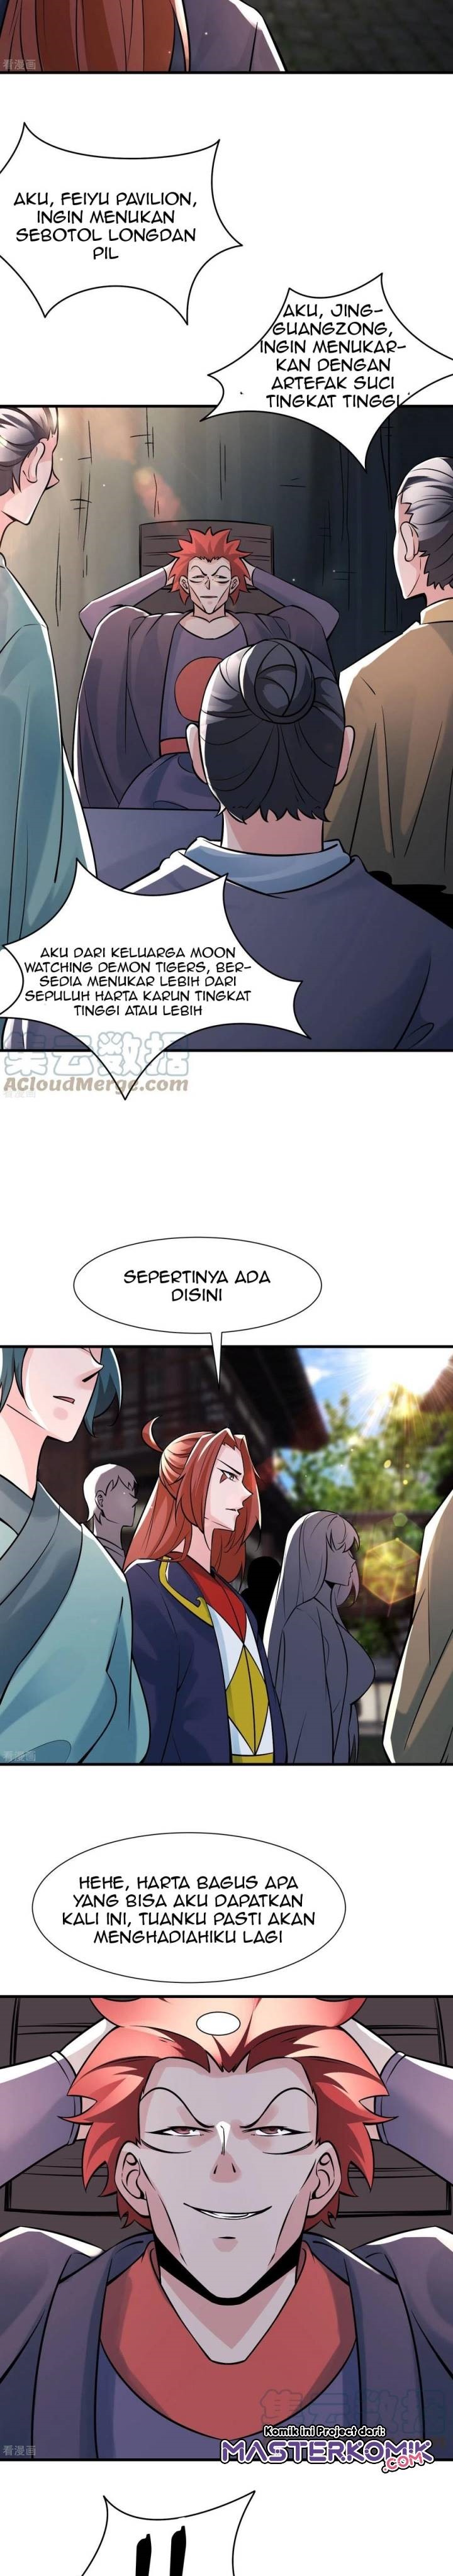 Apprentices Are All Female Devil Chapter 70